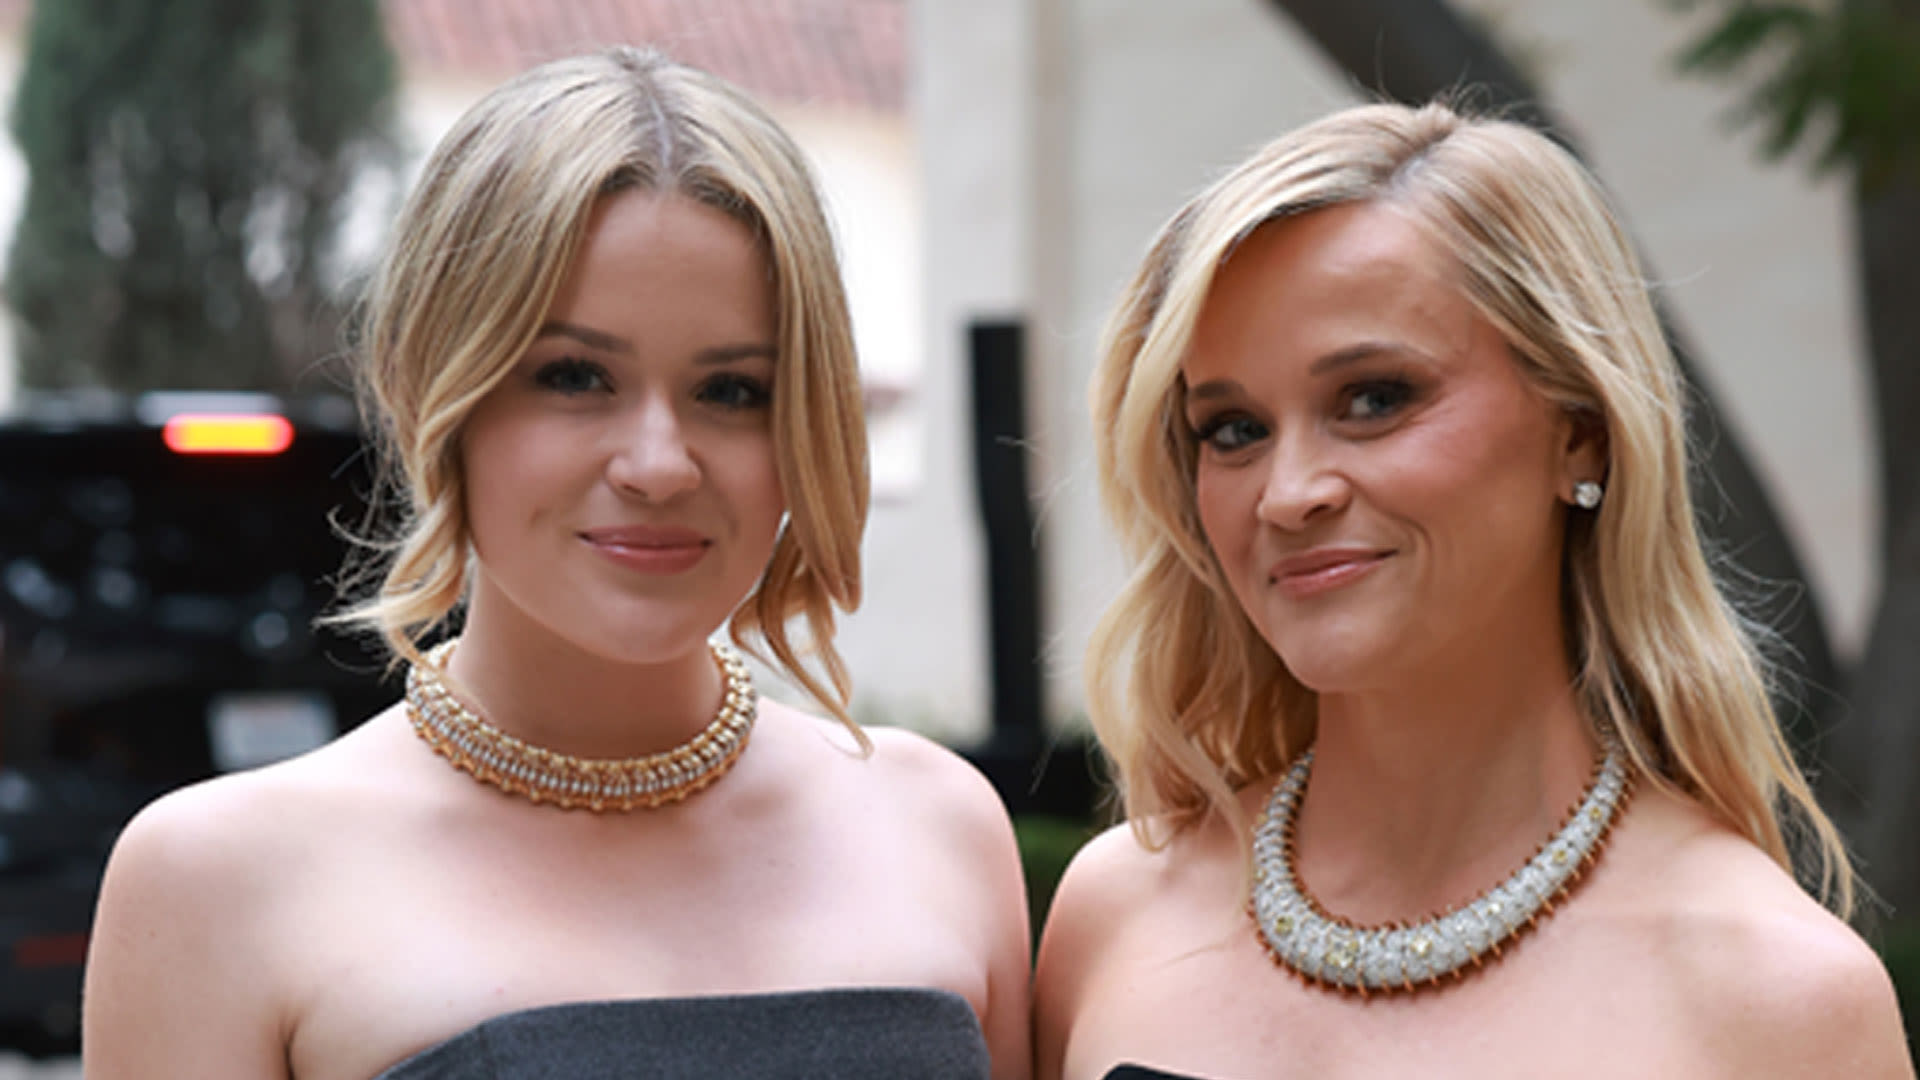 Reese Witherspoon and daughter Ava look identical in glam looks for LA event